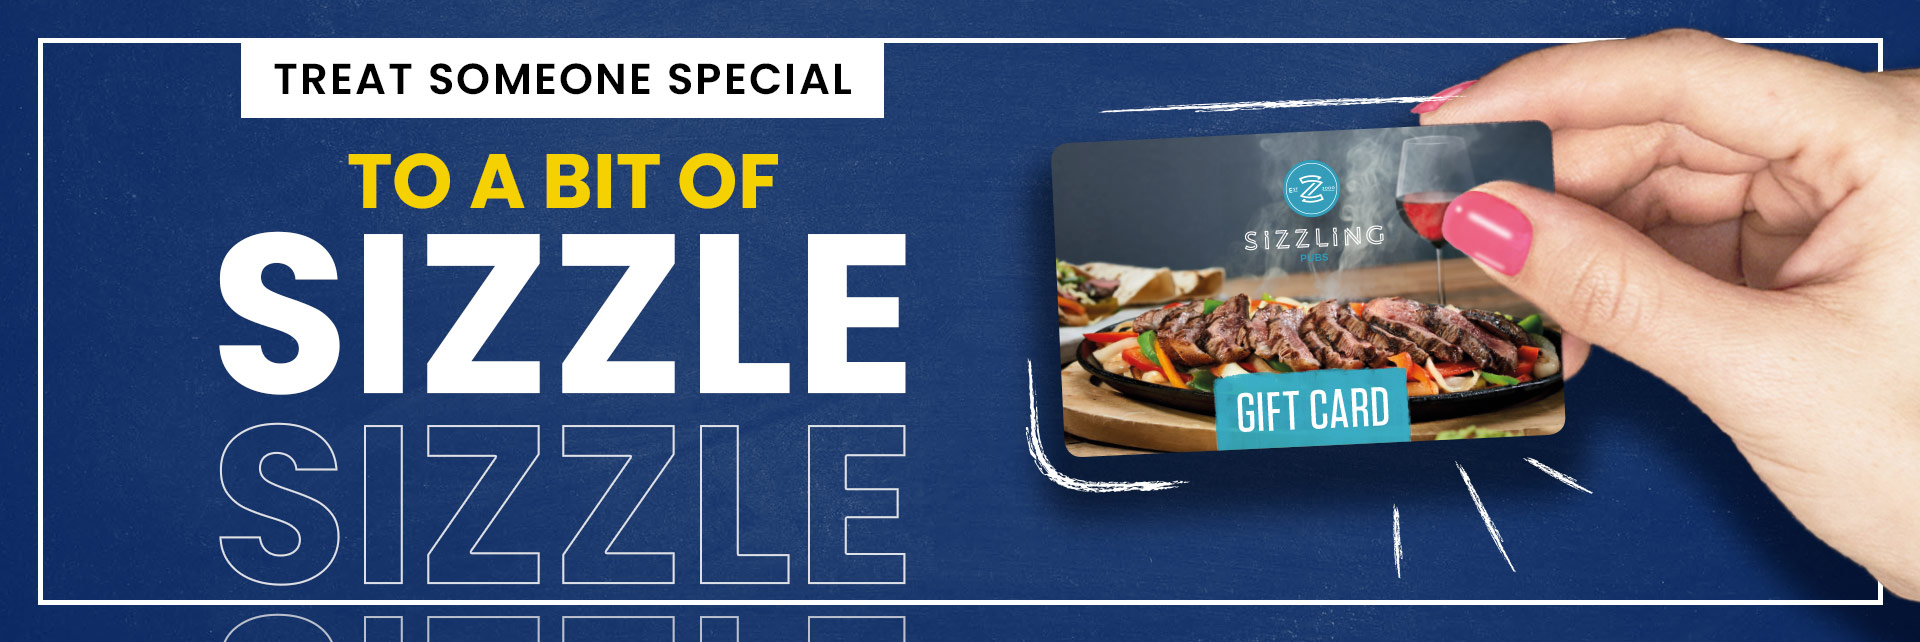 Sizzling Pubs Gift Card at The Bay Horse Inn in Cramlington